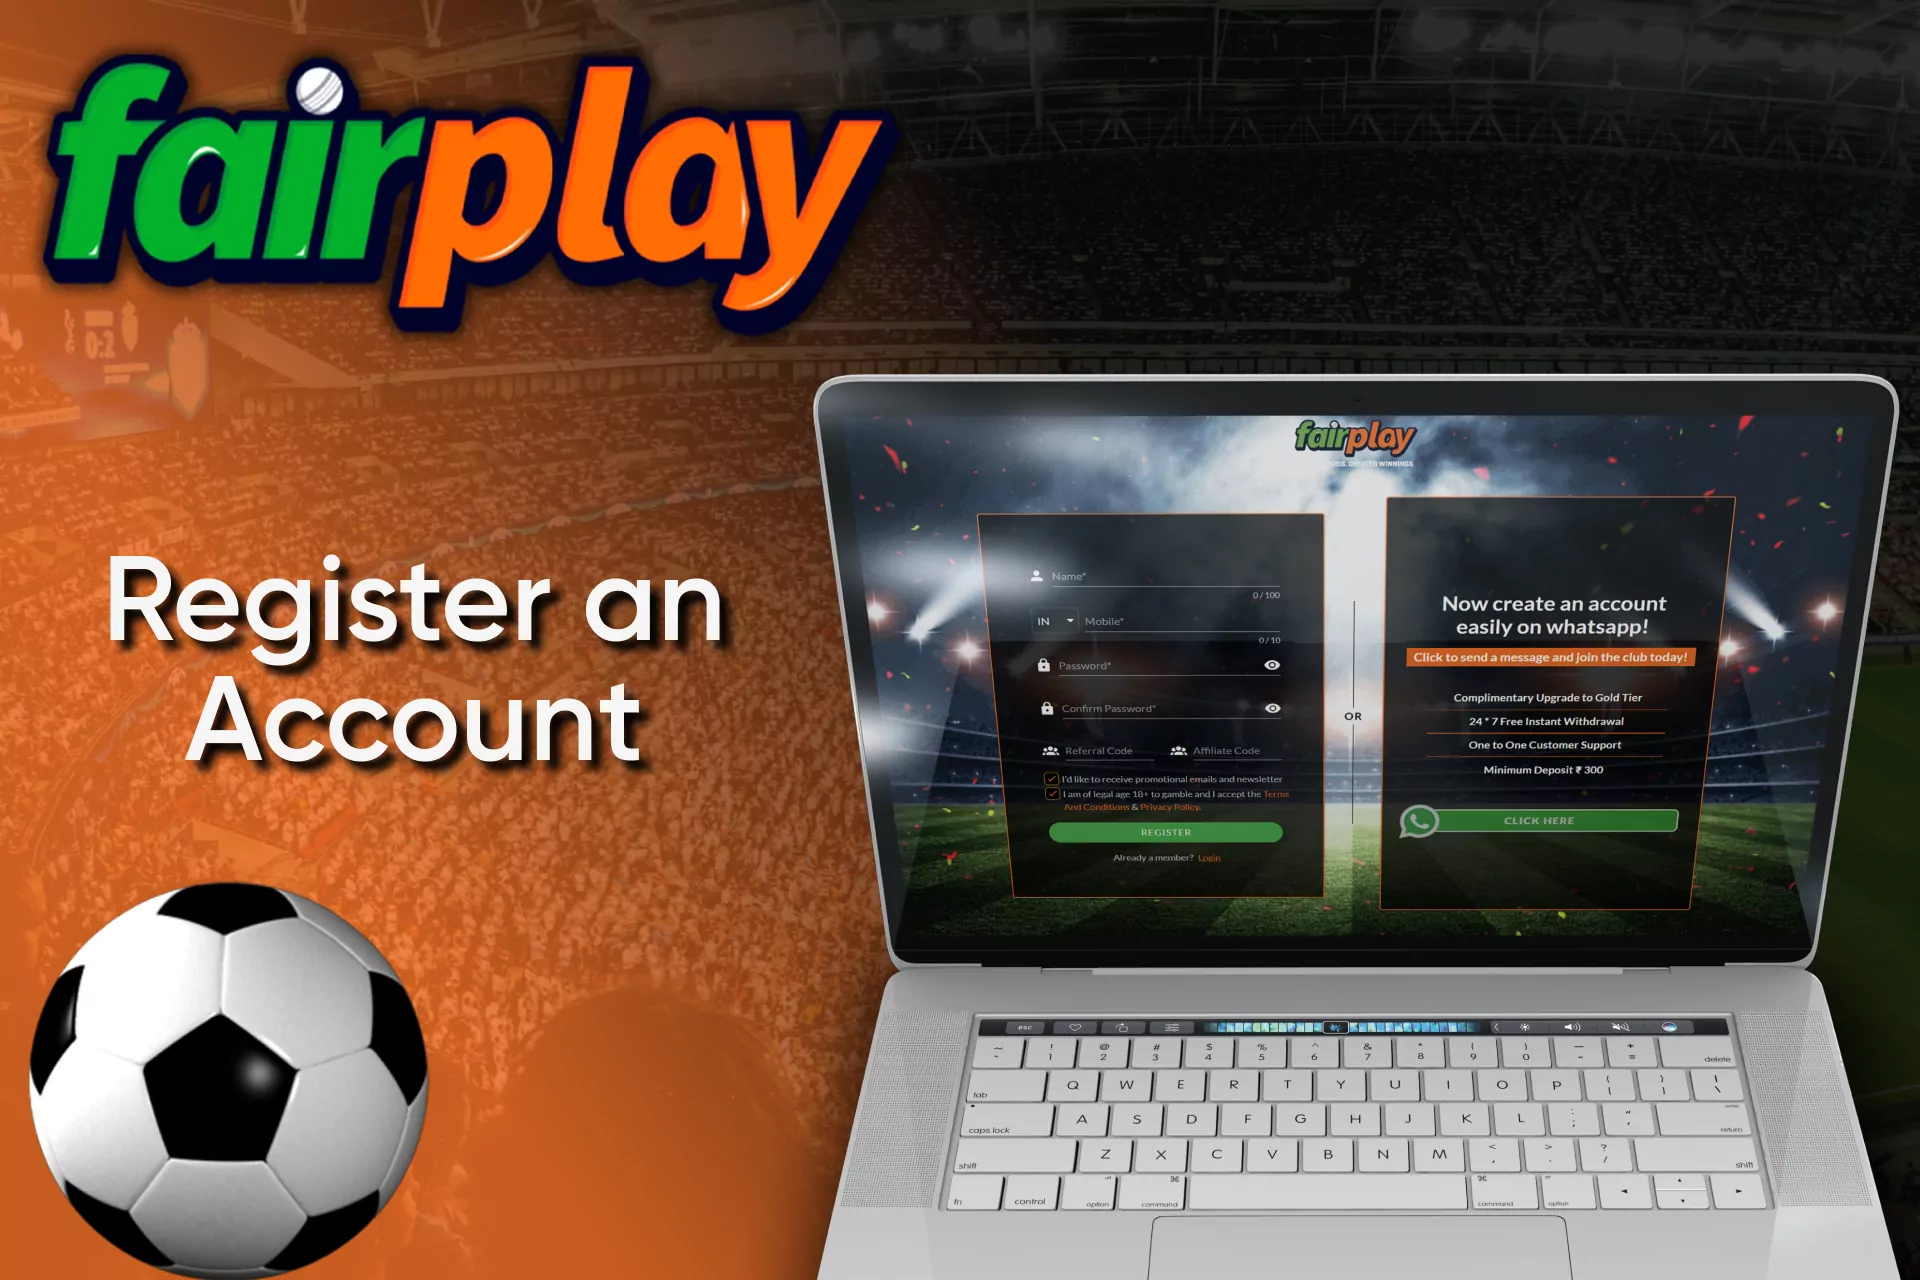 Create an account on the Fairplay site if you don't have one yet.